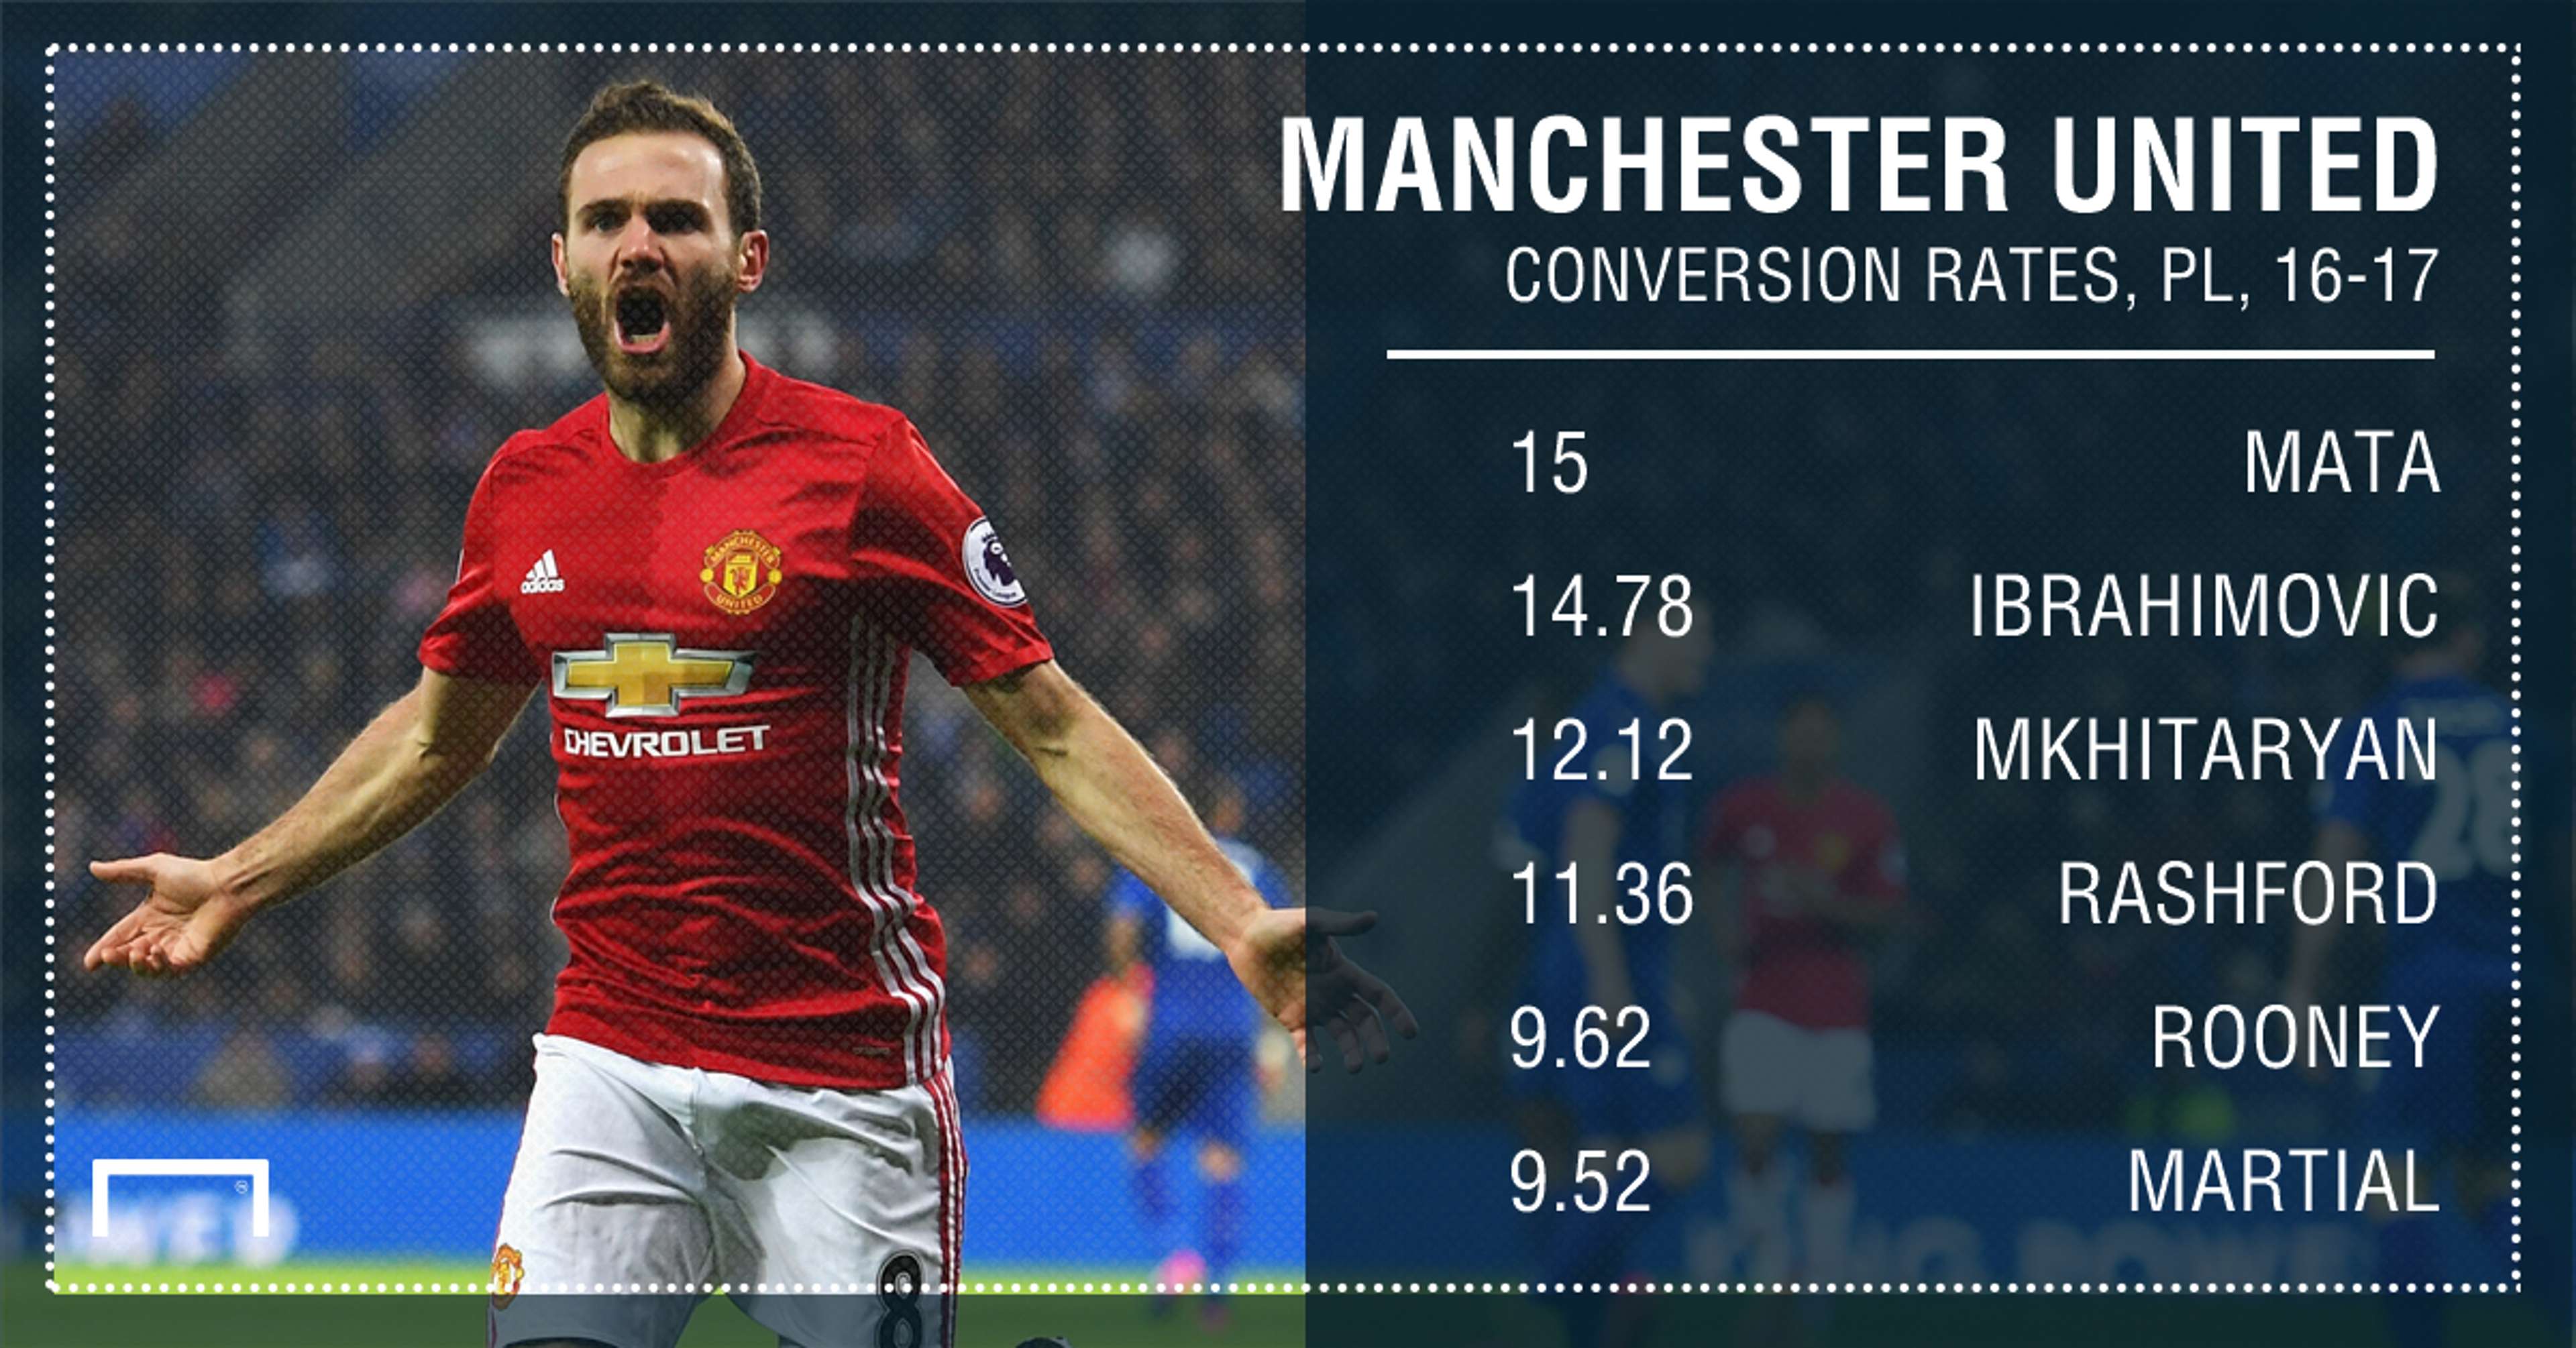 Manchester United conversion rates 16 17